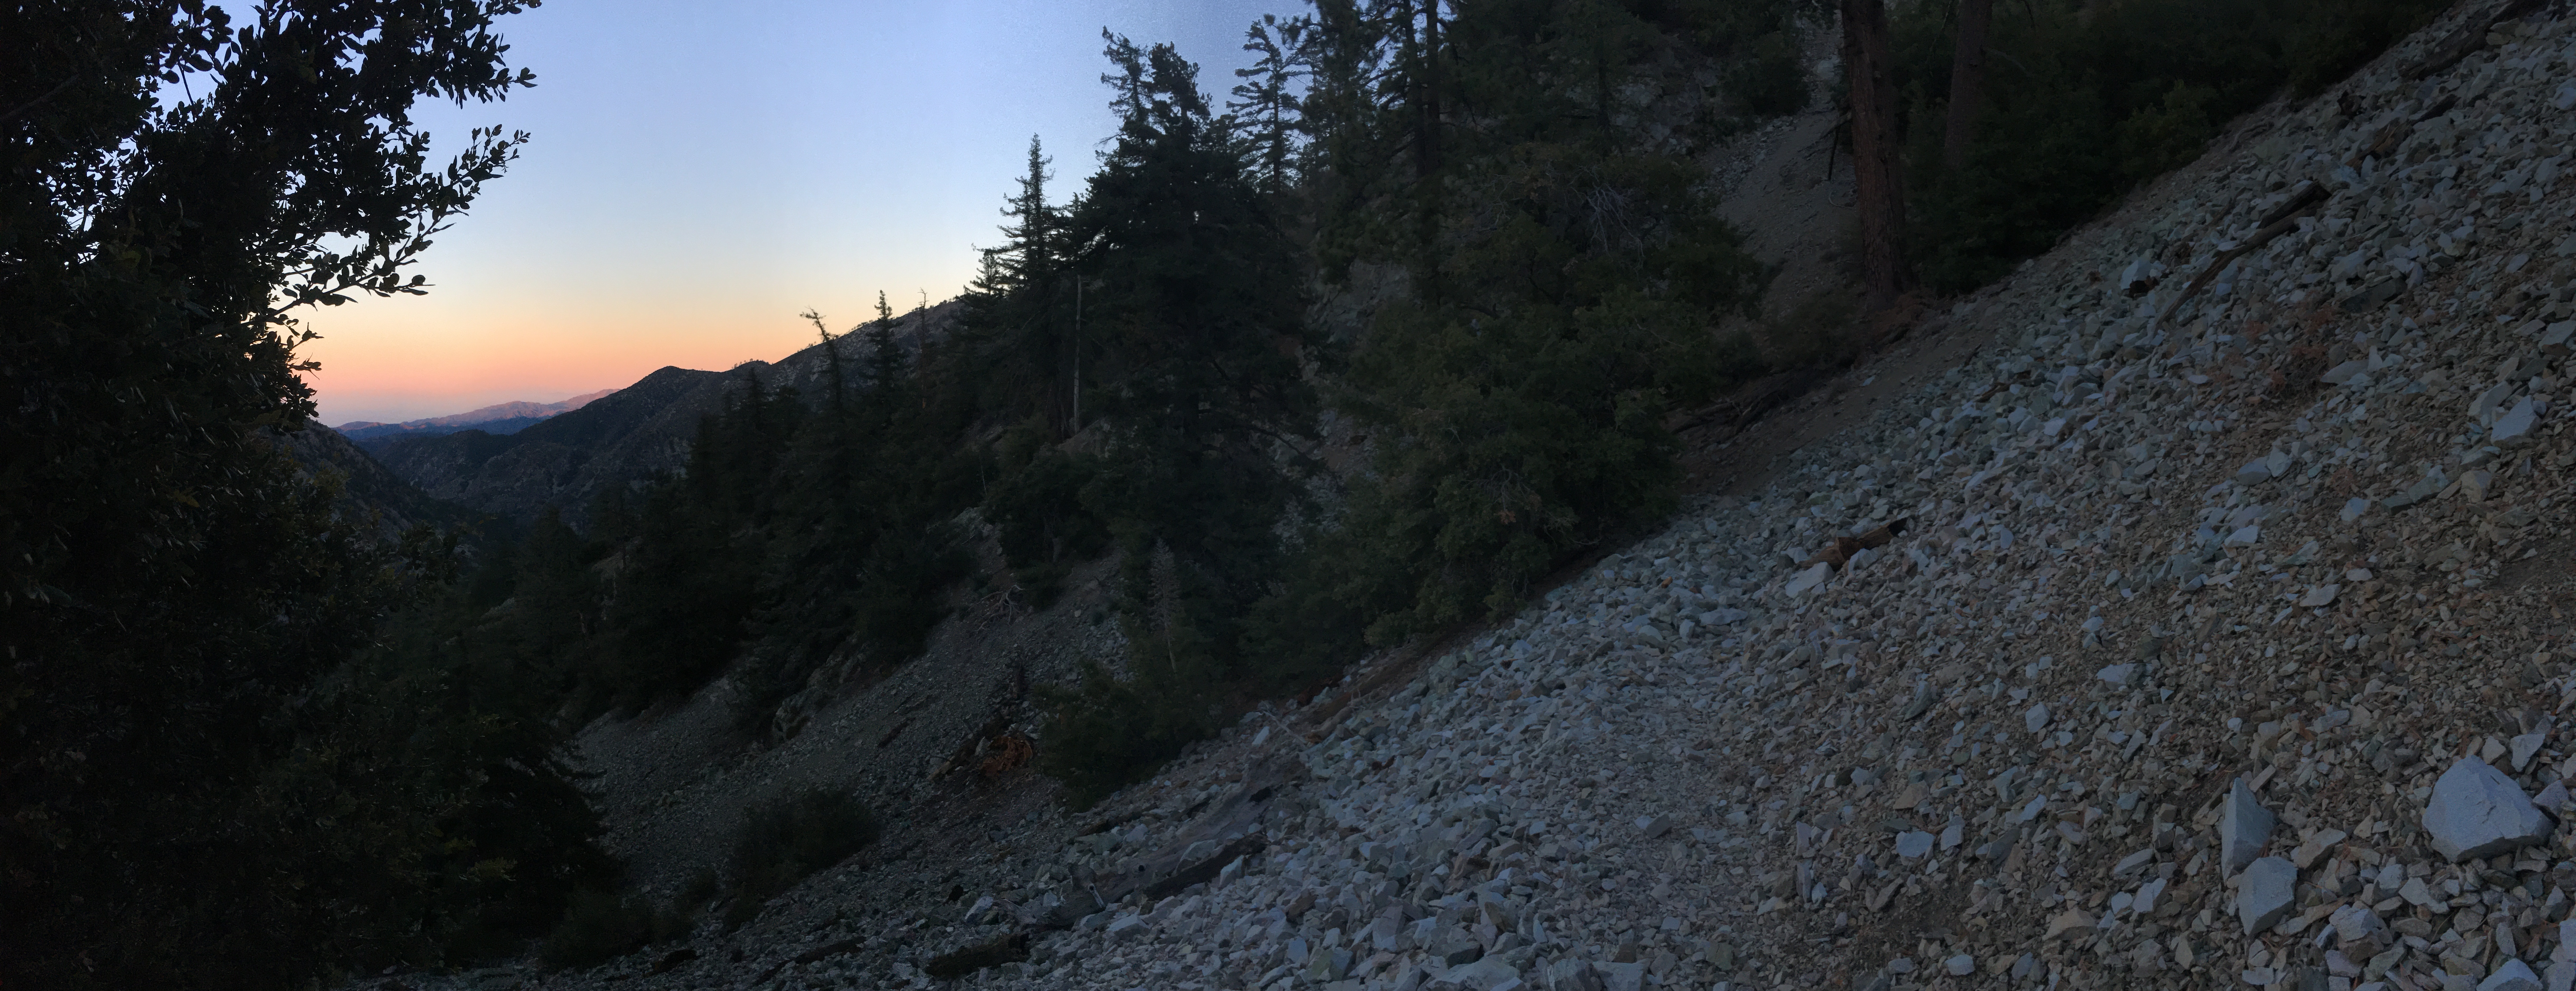 early morning in cucamonga wilderness, pink and blue sky with pine trees and granite mountains